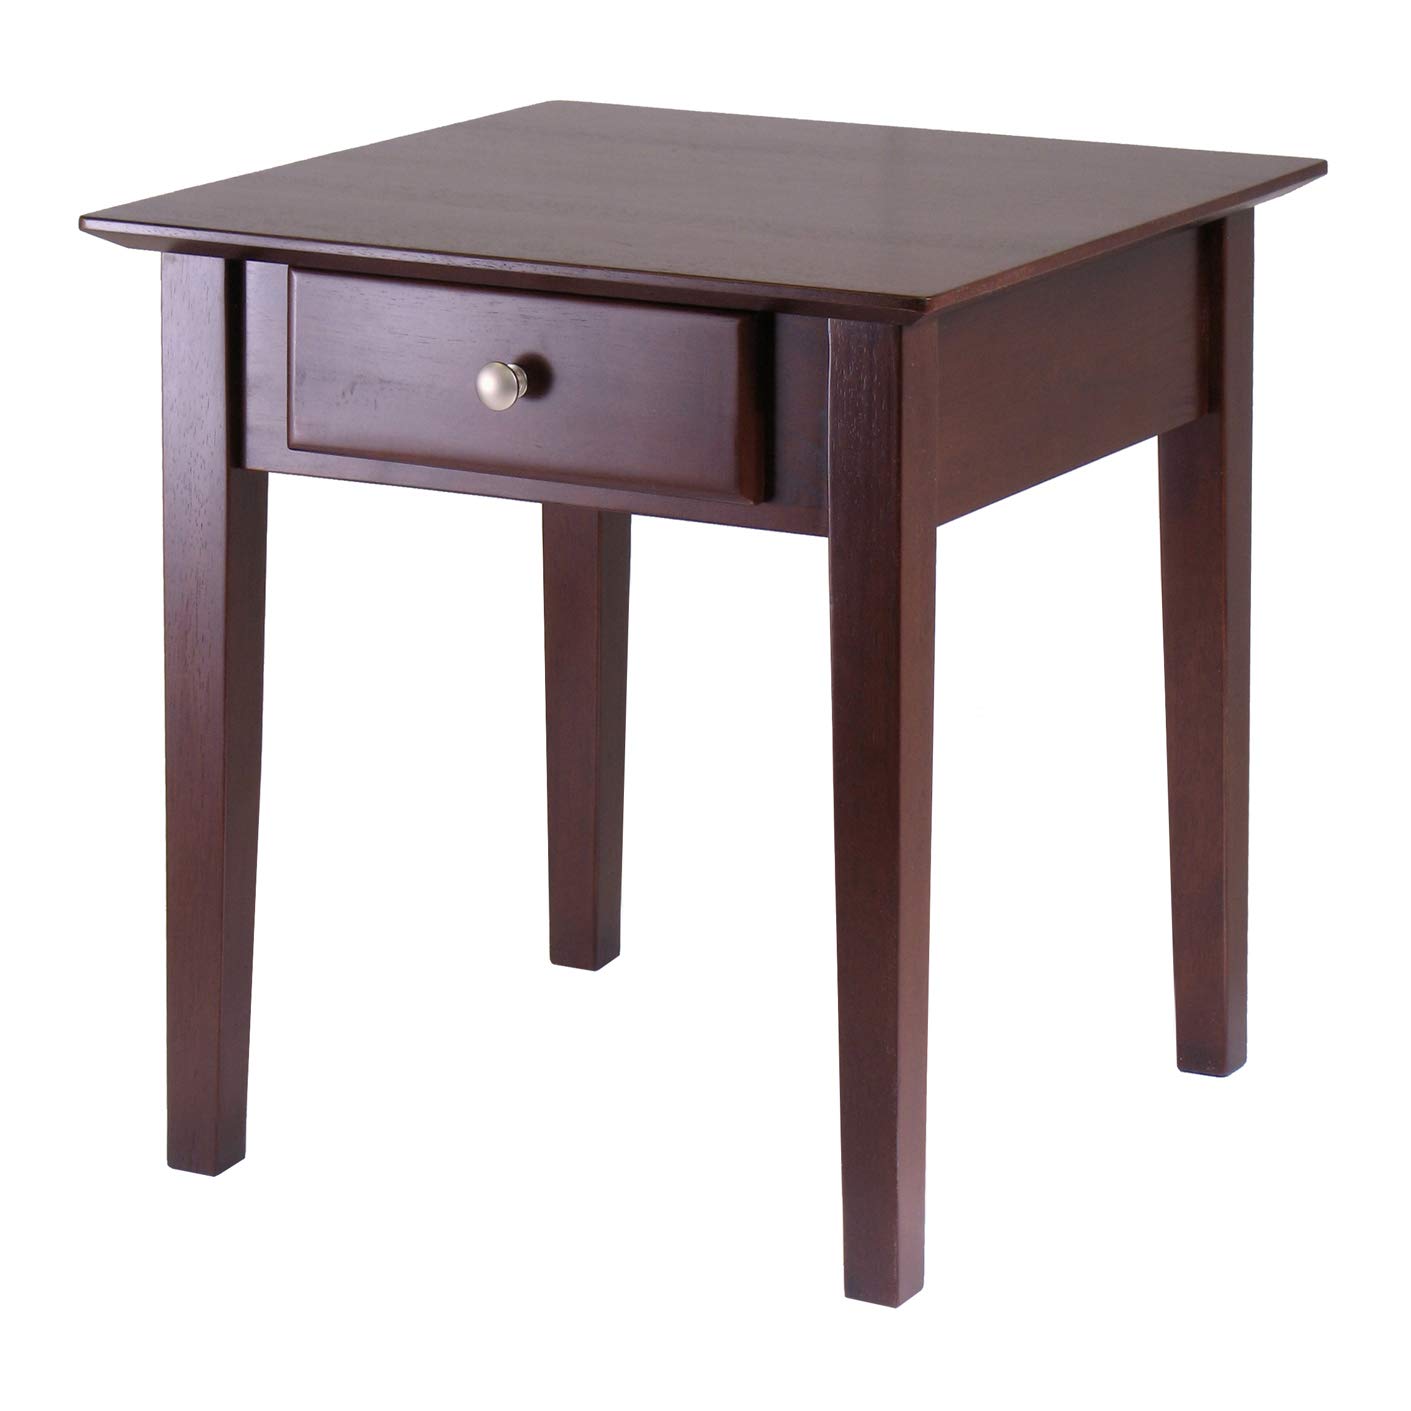 winsome wood rochester occasional table antique eugene accent espresso walnut kitchen dining marble coffee gold legs sofa end ikea pier promo code patio umbrella room dale tiffany